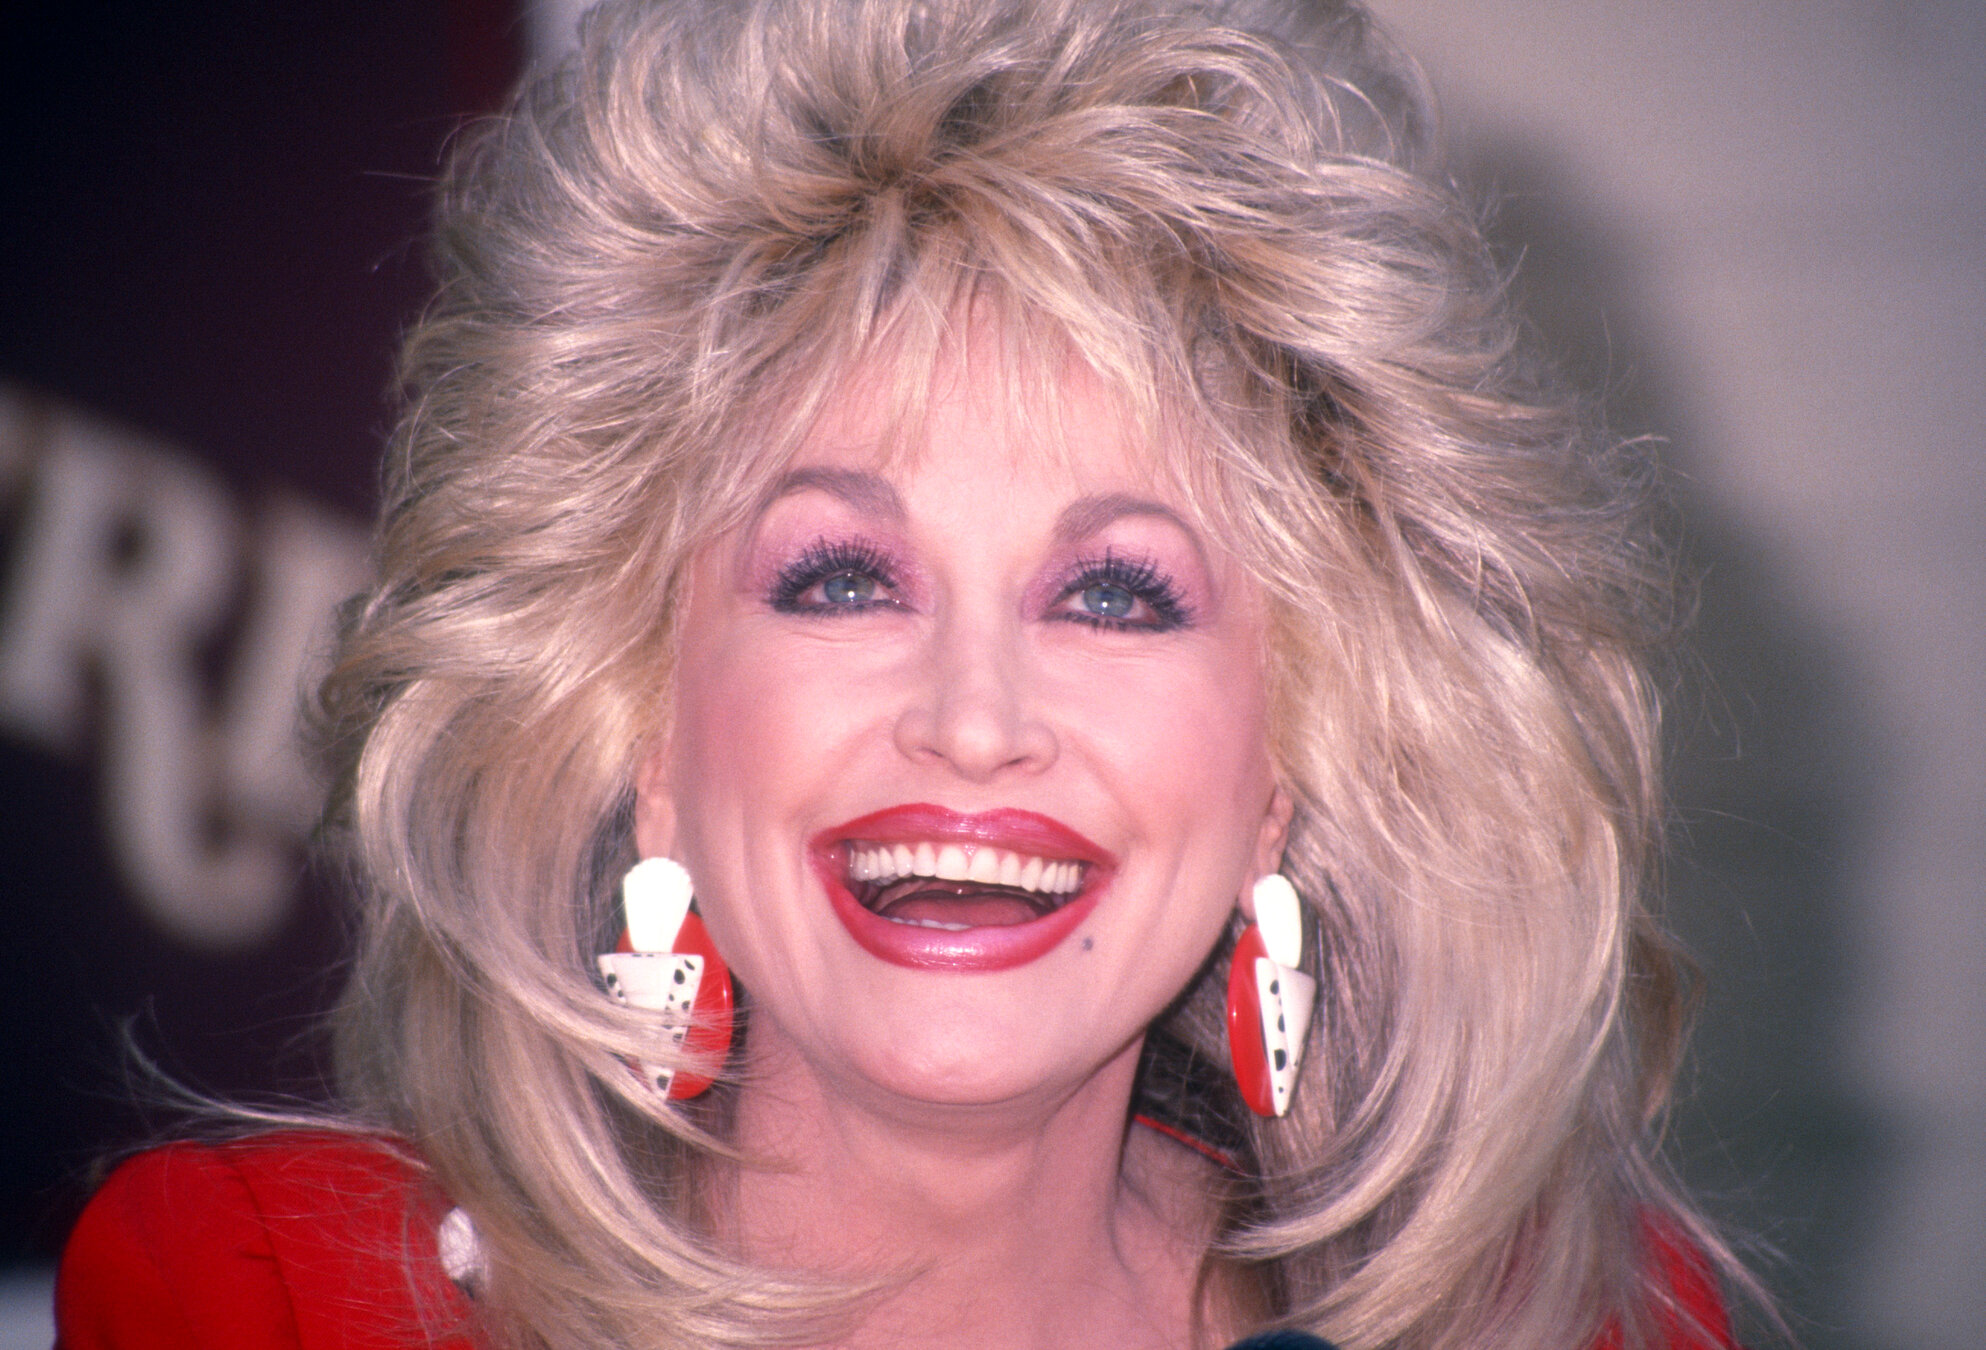 A close-up of Dolly Parton with her big, blonde hair, red lips, and red earrings.